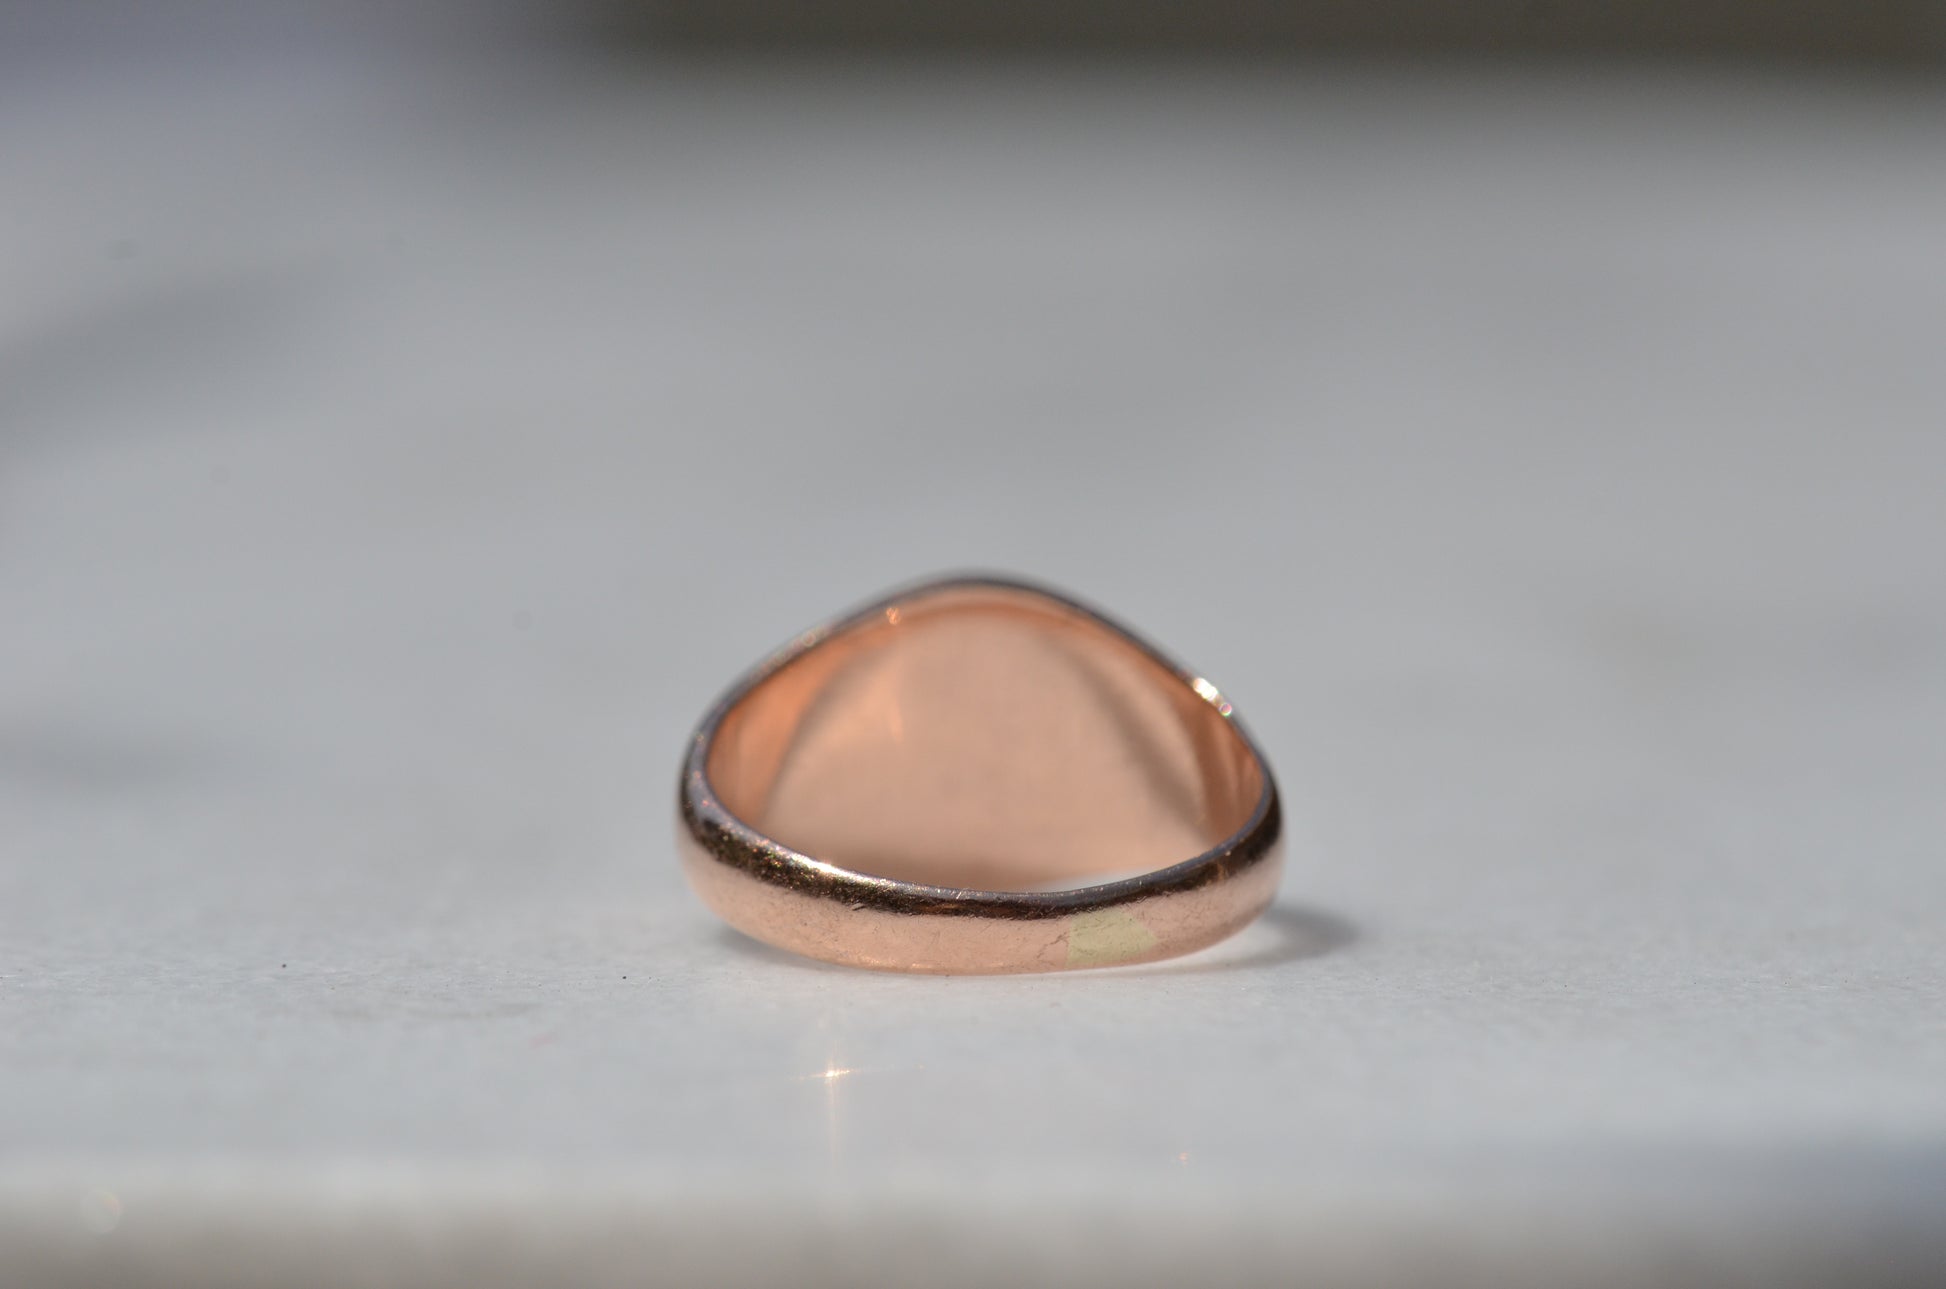 The back of the ring is shown with the band in focus, with a lightly visible solder seam showing evidence of past resizing.